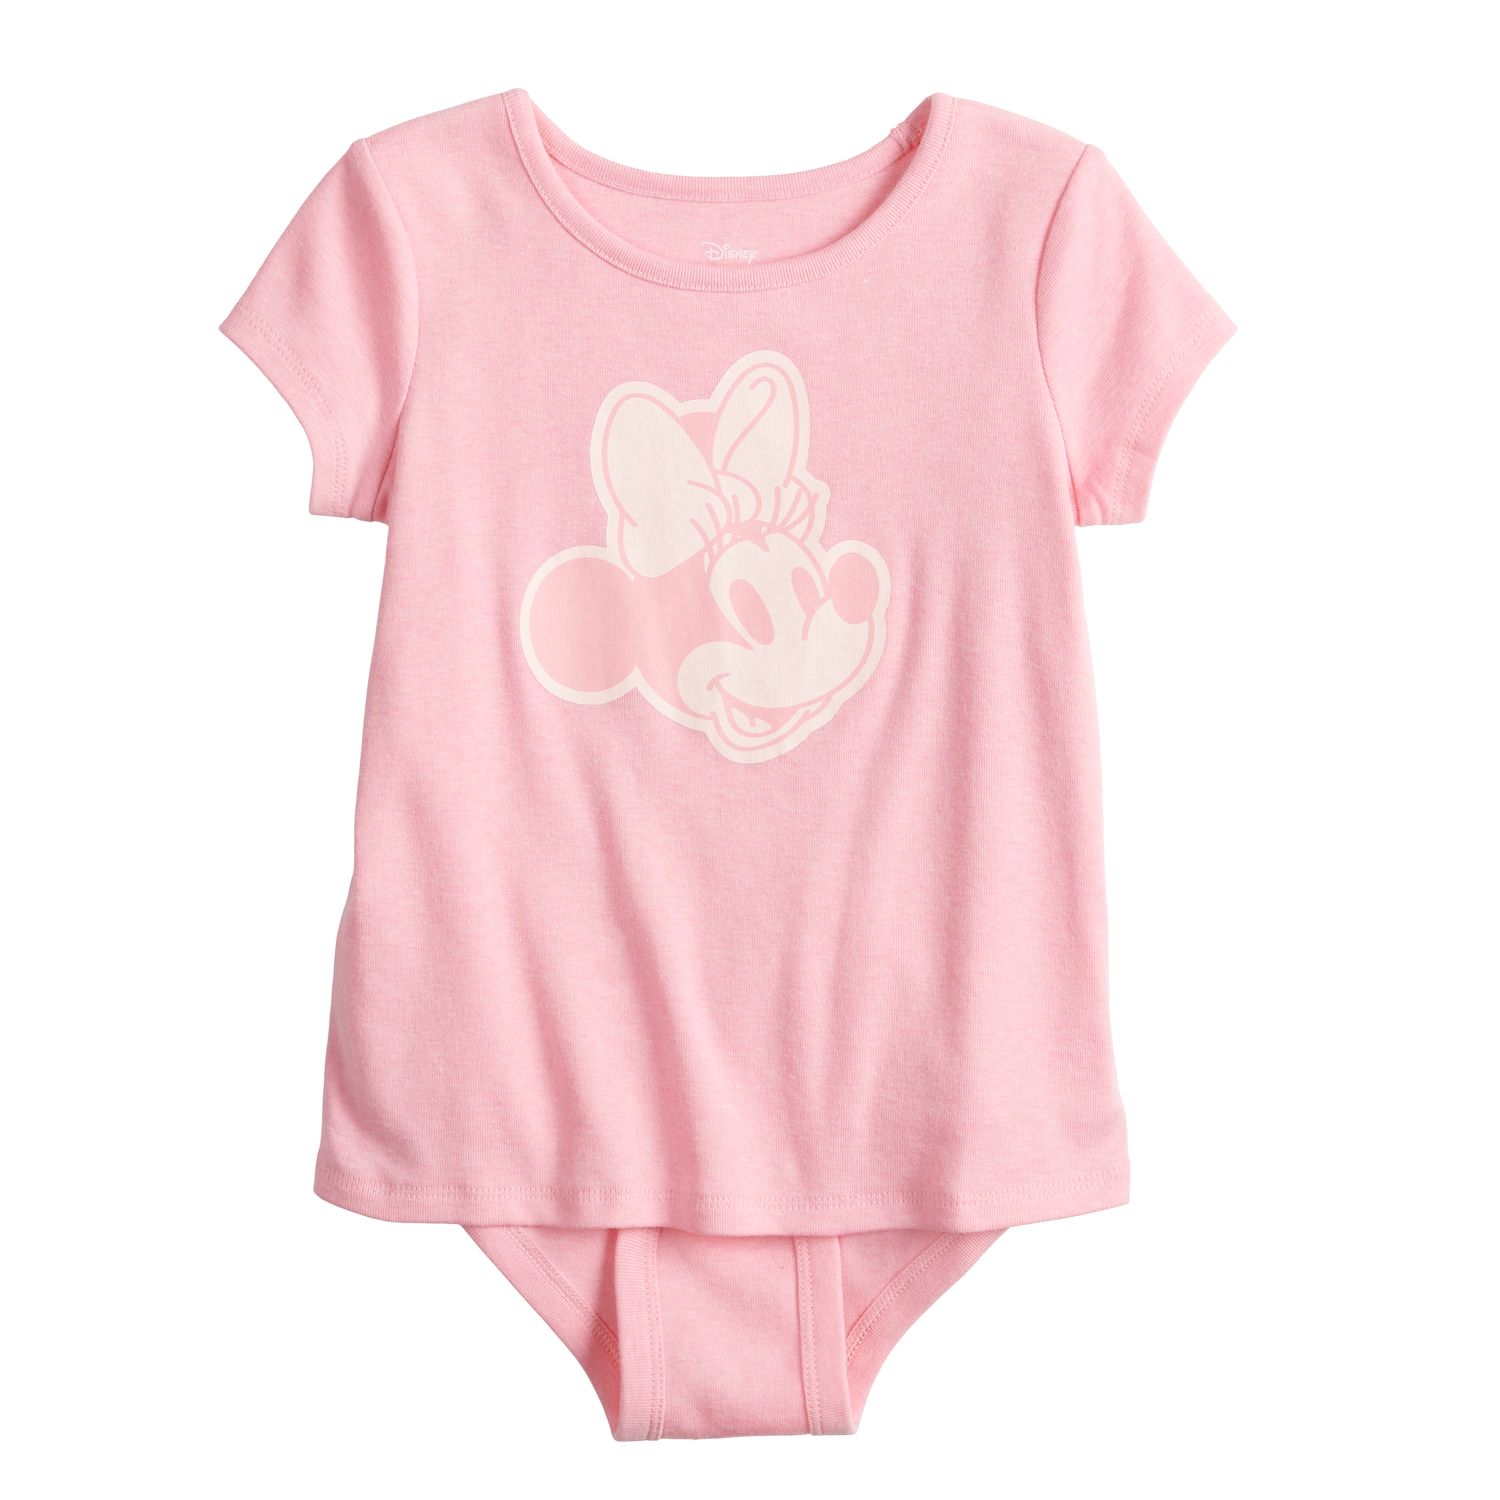 Image for Disney/Jumping Beans Disney's Minnie Mouse Toddler Girl Adaptive Layered Bodysuit by Jumping Beans® at Kohl's.